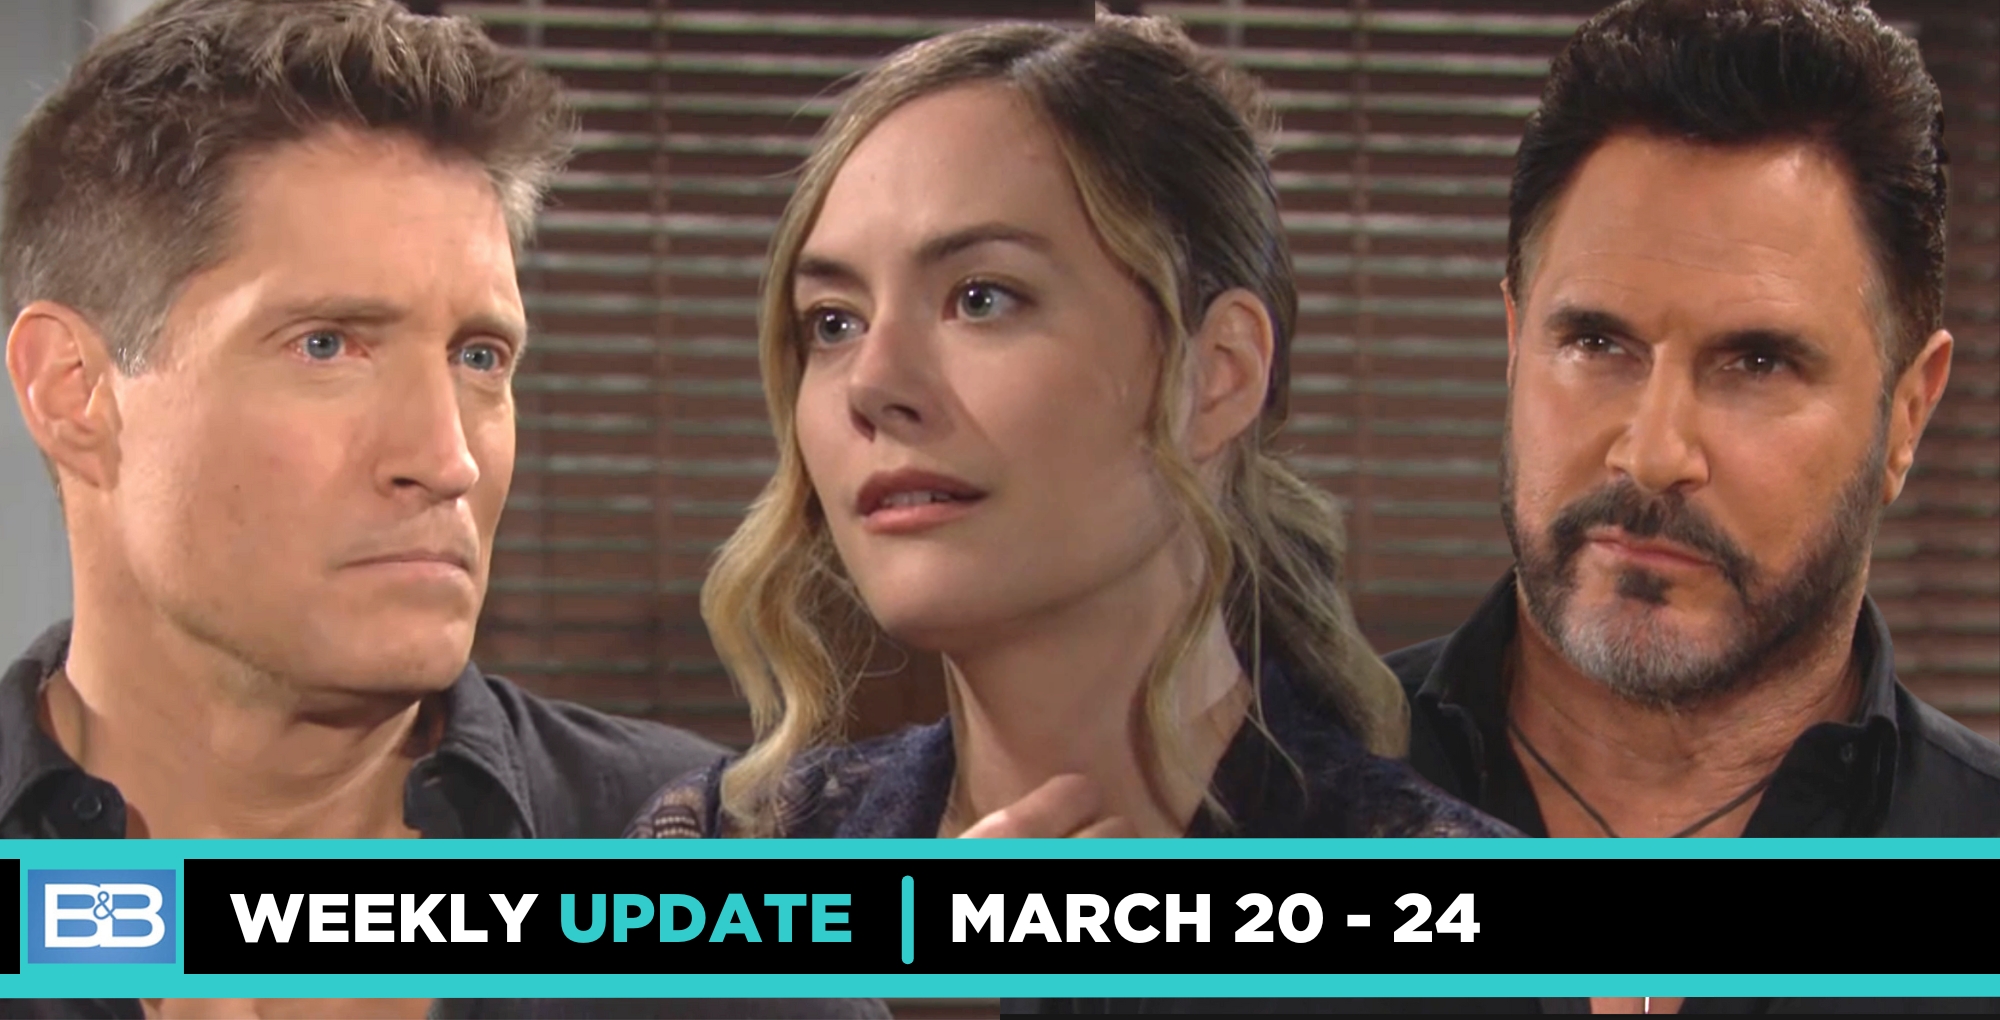 the bold and the beautiful spoilers weekly update features deacon, hope, and bill.